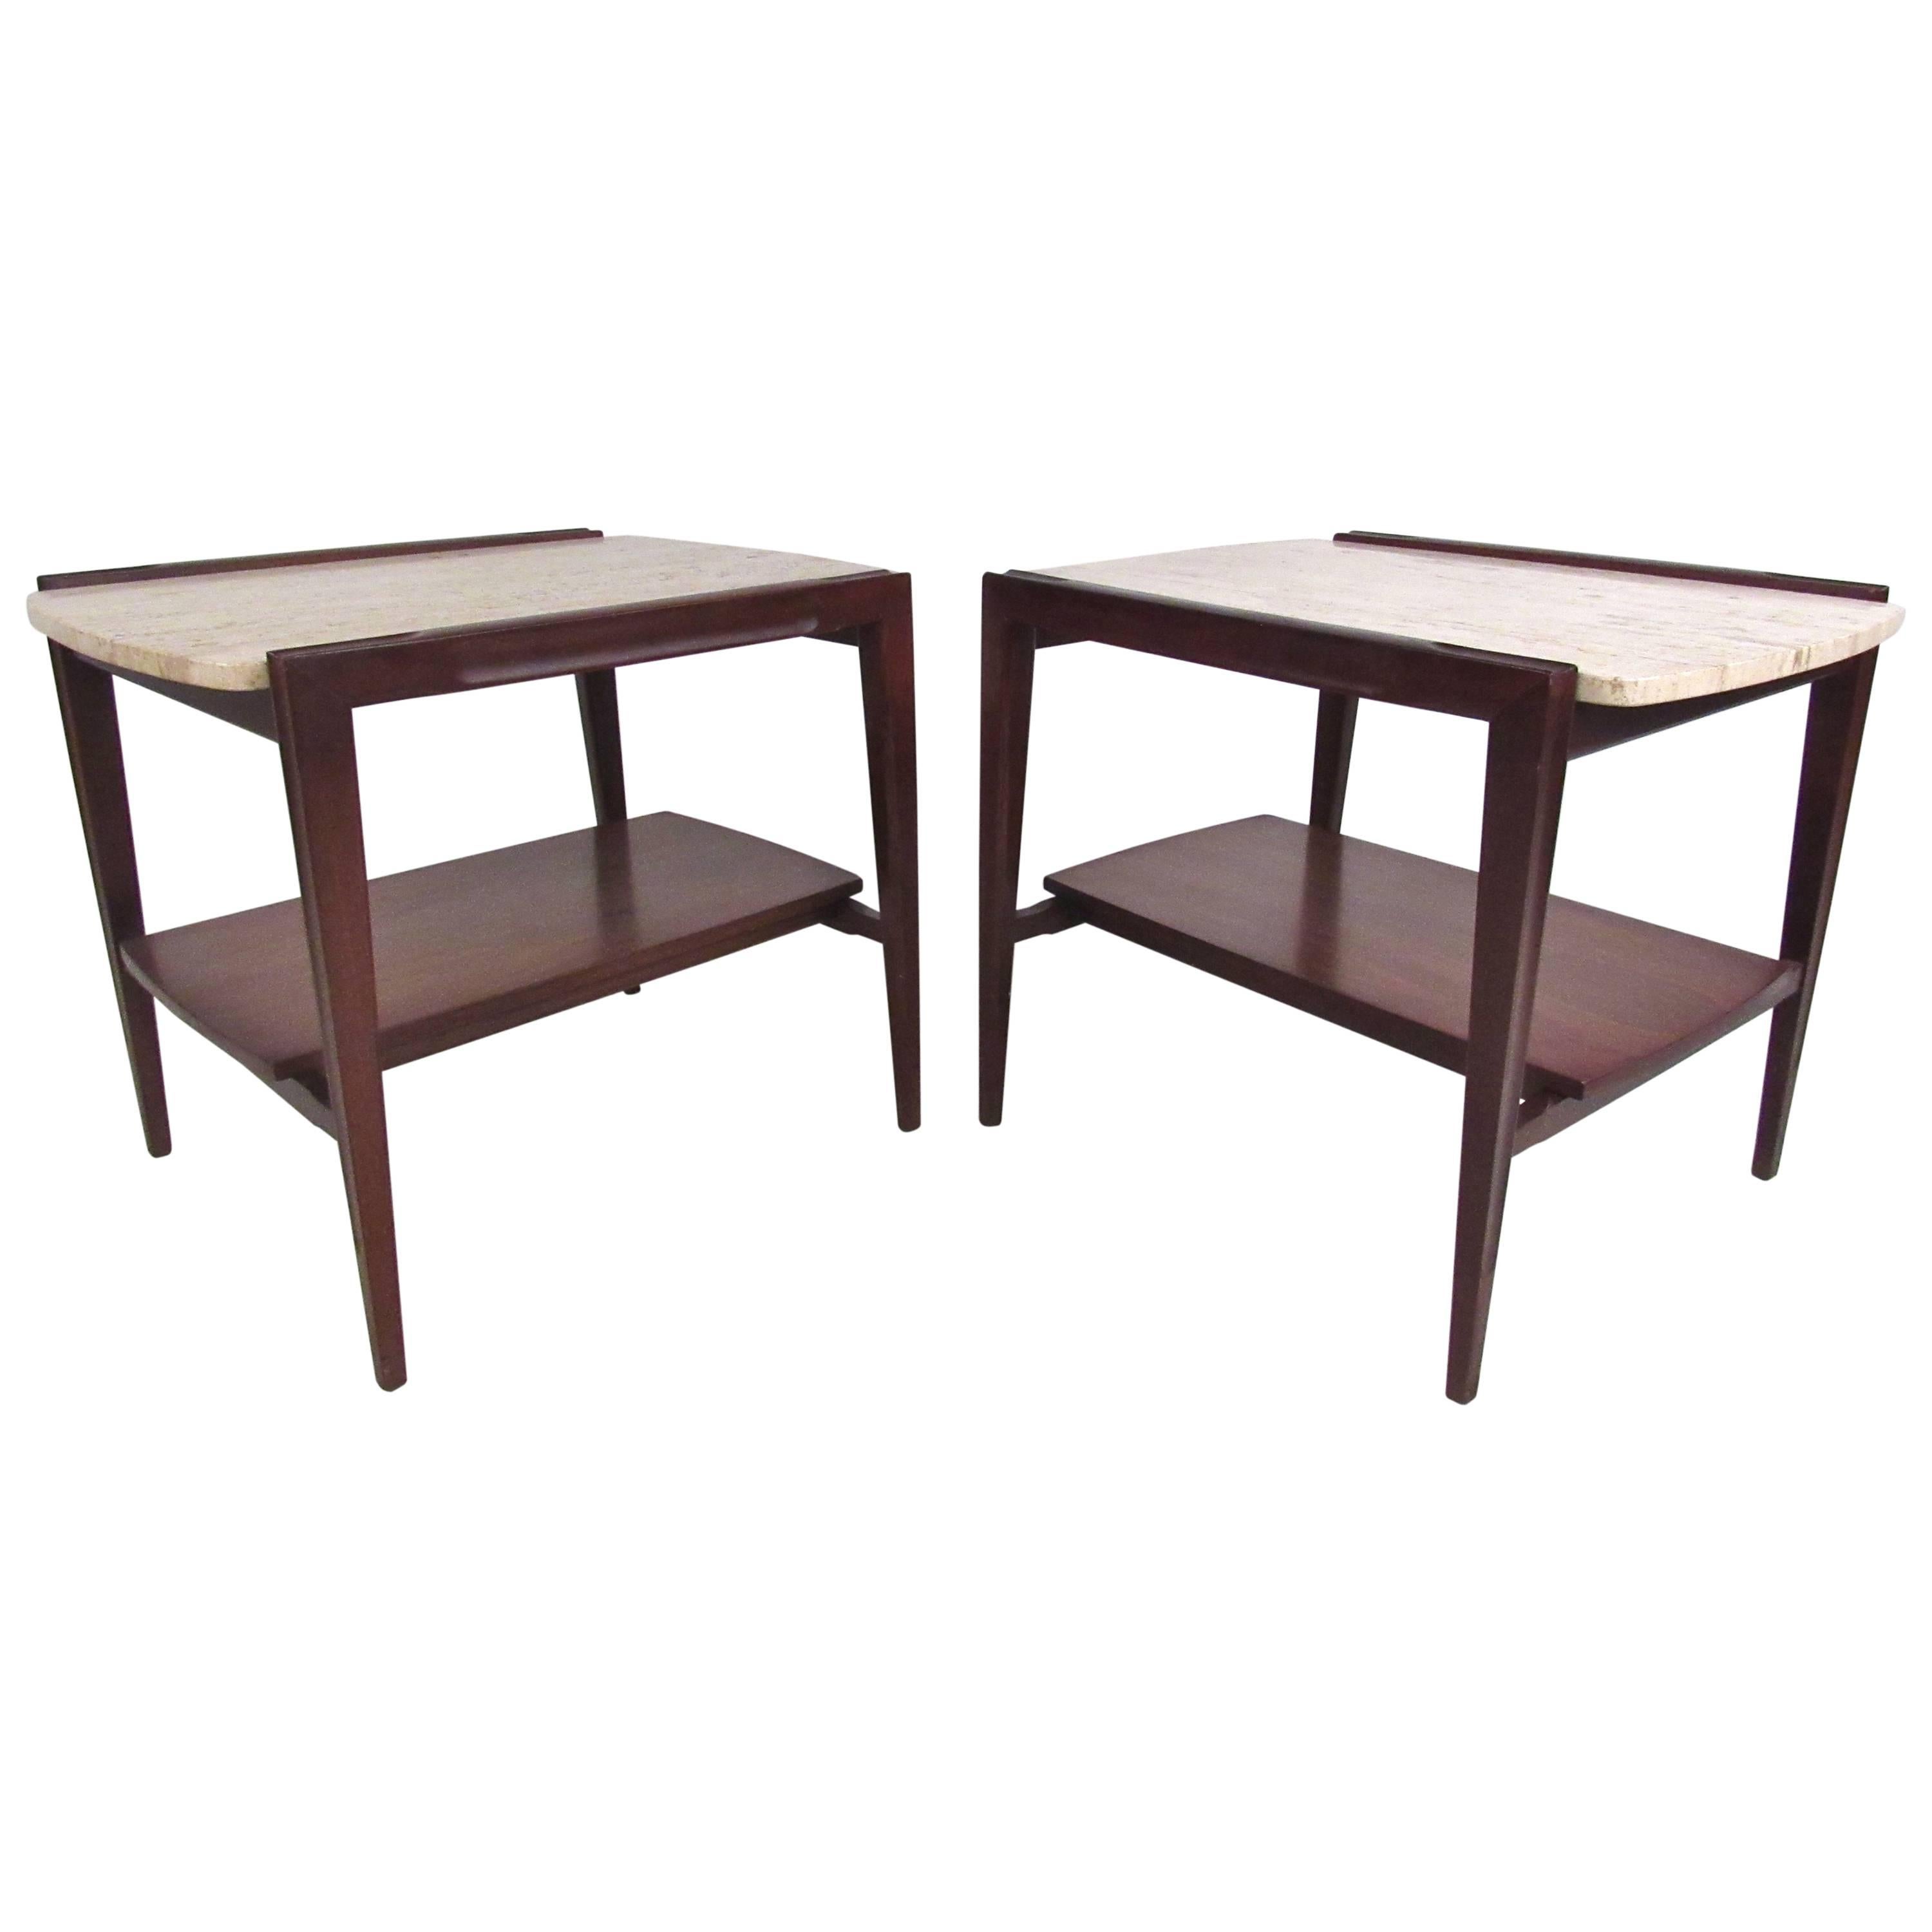 Pair of Mid-Century Modern Marble-Top End Tables